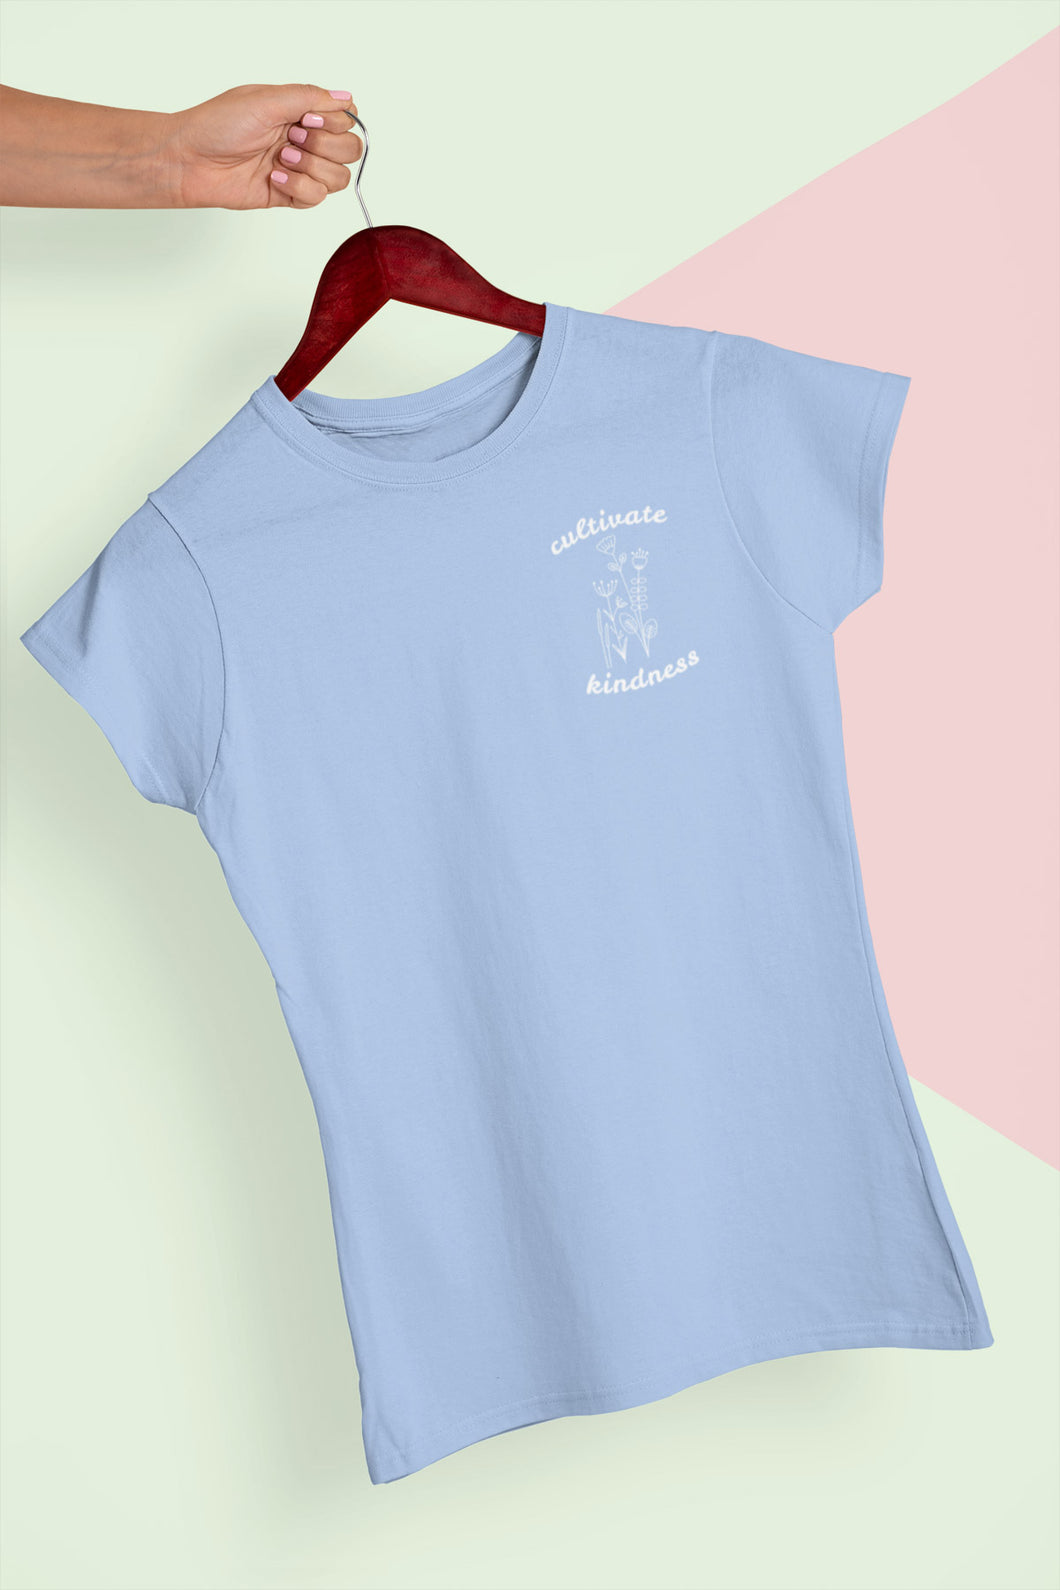 Cultivate Kindness Shirt Blue